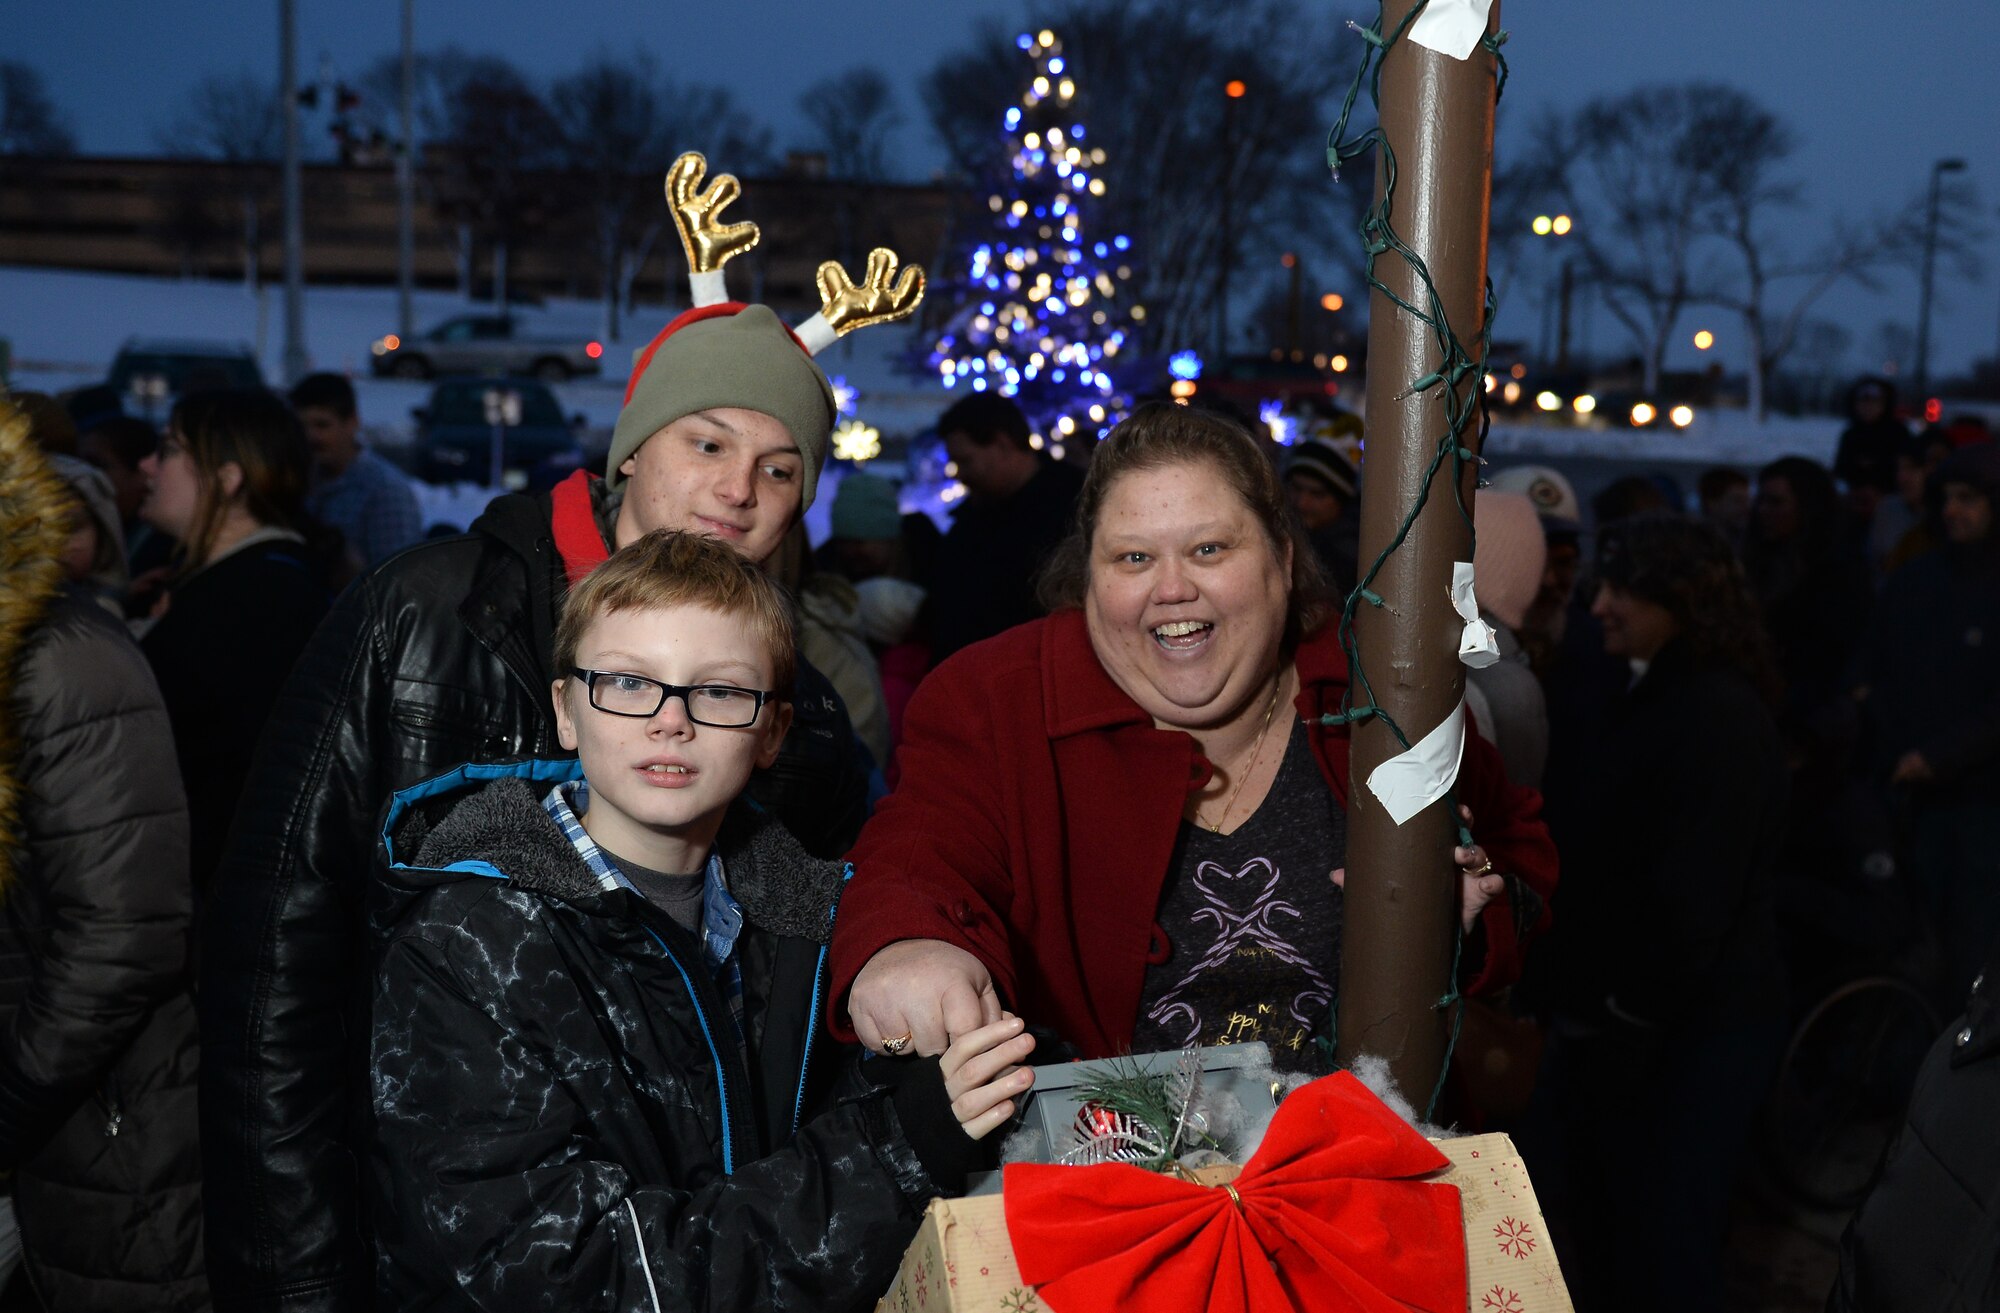 The Clark family lights the Christmas tree during the annual Offutt Christmas Tree Lighting event held at the Patriot Club, Offutt Air Force Base, Nebraska, Dec. 6, 2018. Following the tree lighting, the crowd of attendees made their way into the club for the evening’s festivities. (U.S. Air Force photo by Josh Plueger)